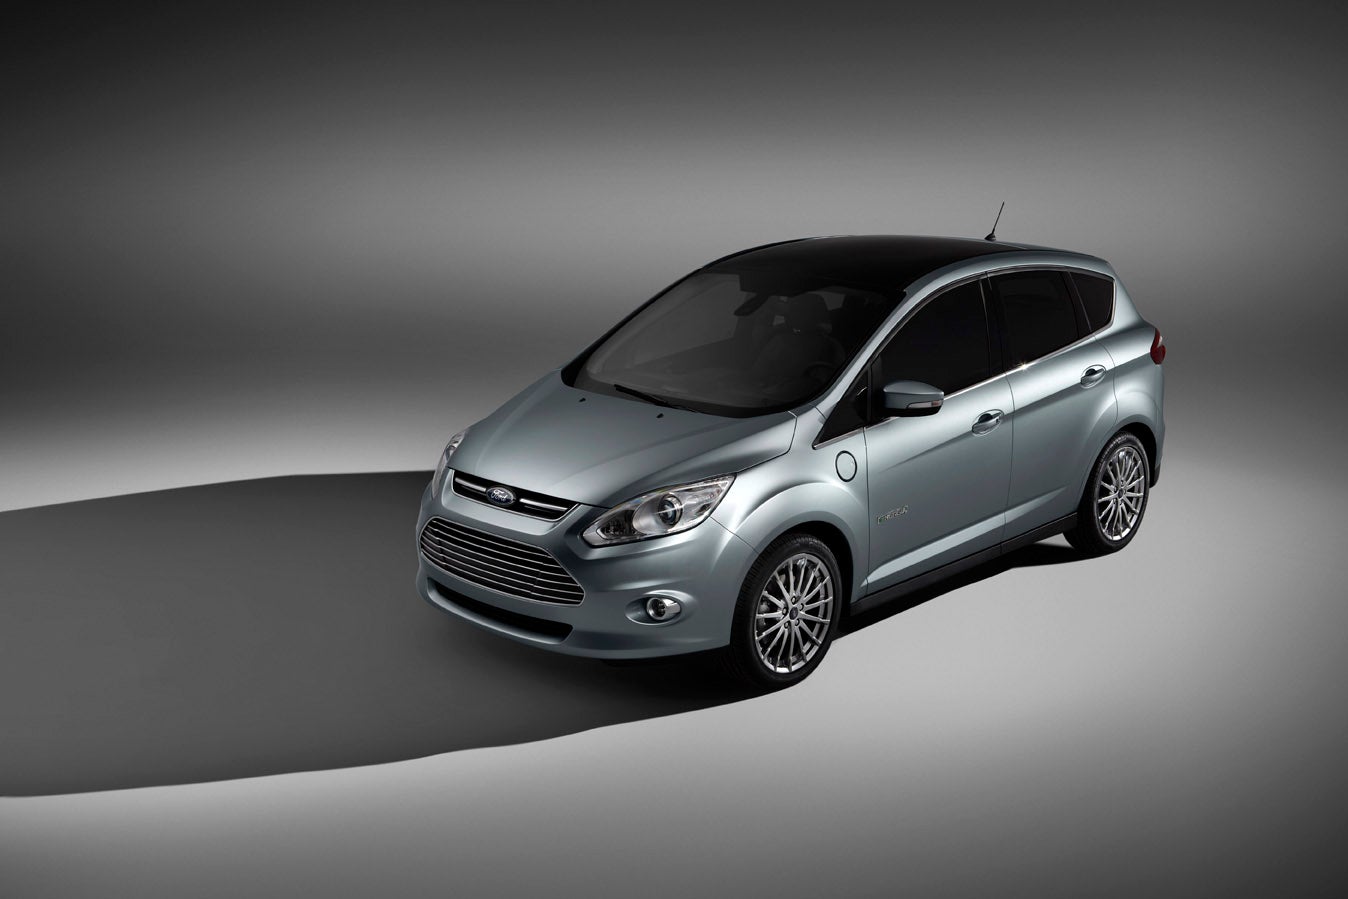 Detroit Auto Show: Ford Unveils The C-MAX Energi, Its First Plug-In Hybrid